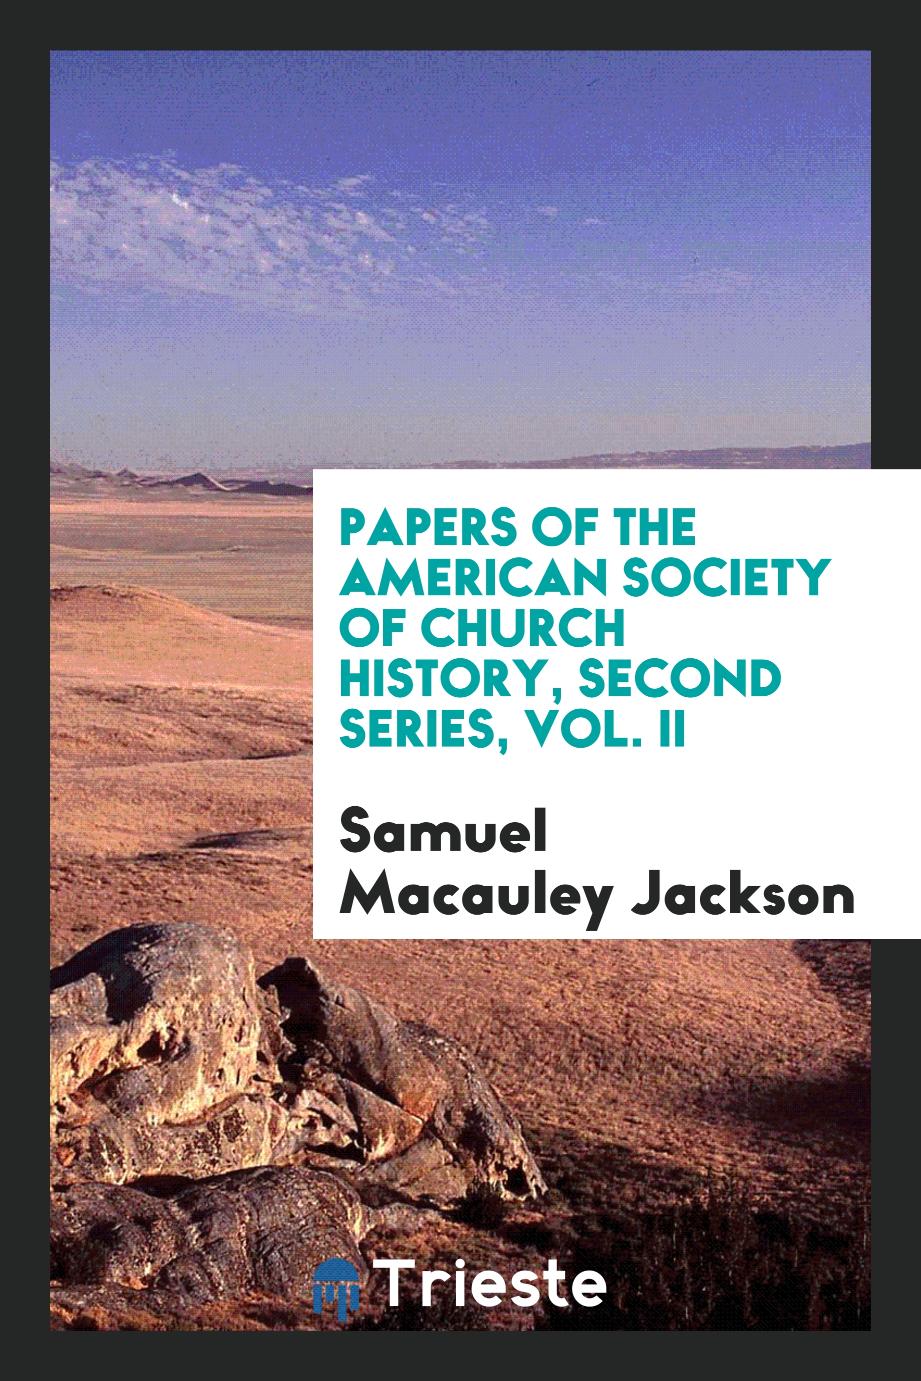 Papers of the American Society of Church History, Second series, Vol. II